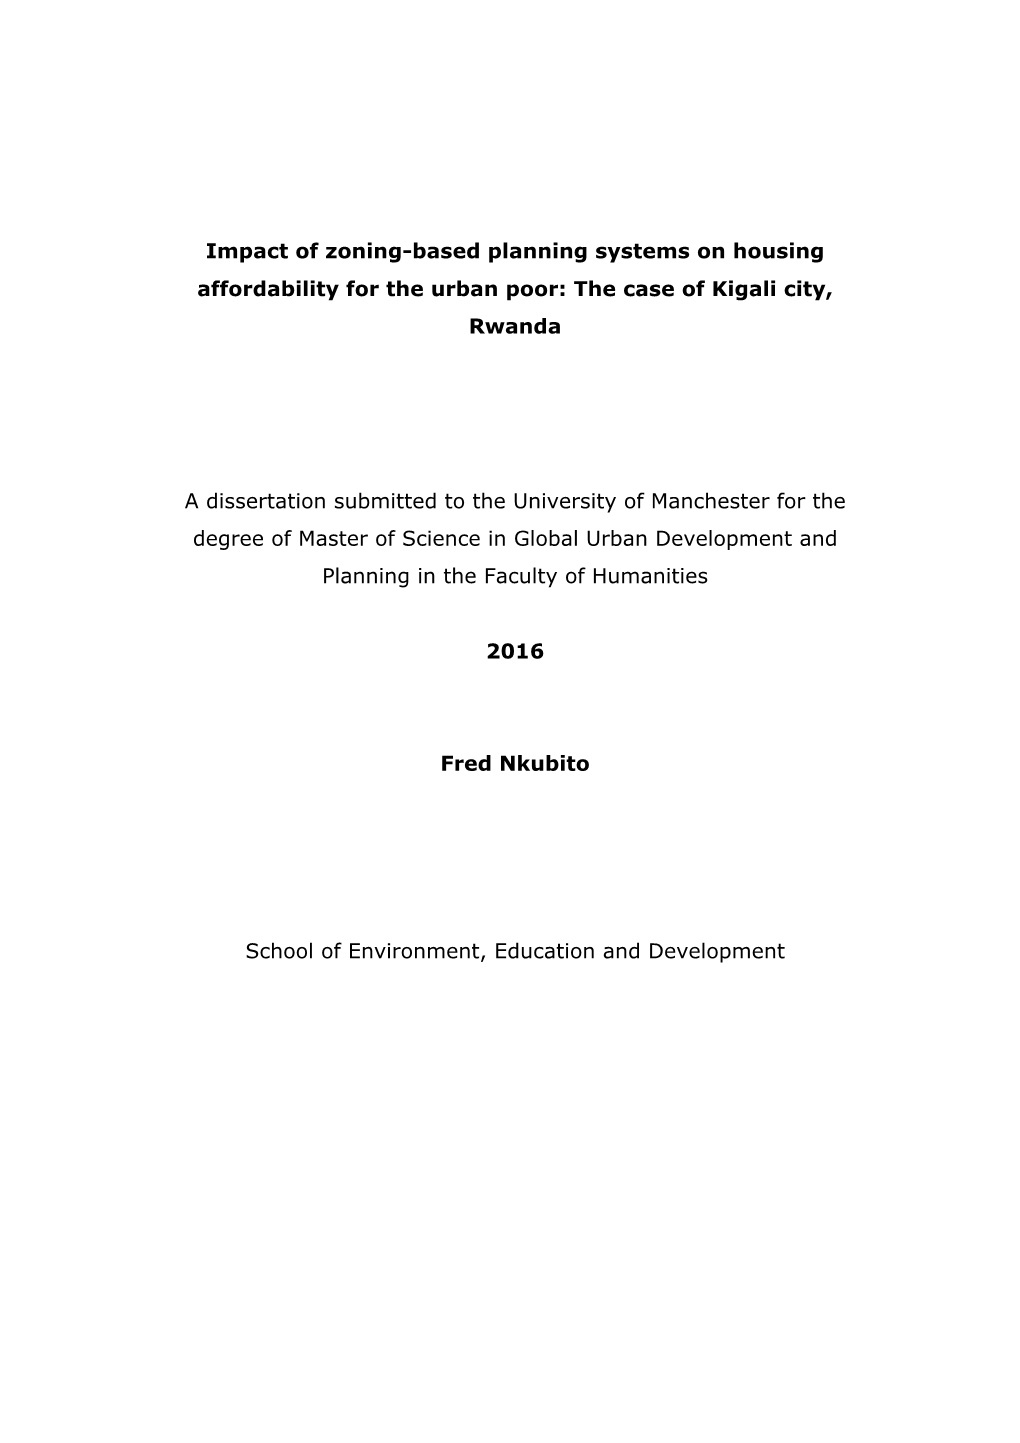 Impact of Zoning-Based Planning Systems on Housing Affordability for the Urban Poor: the Case of Kigali City, Rwanda